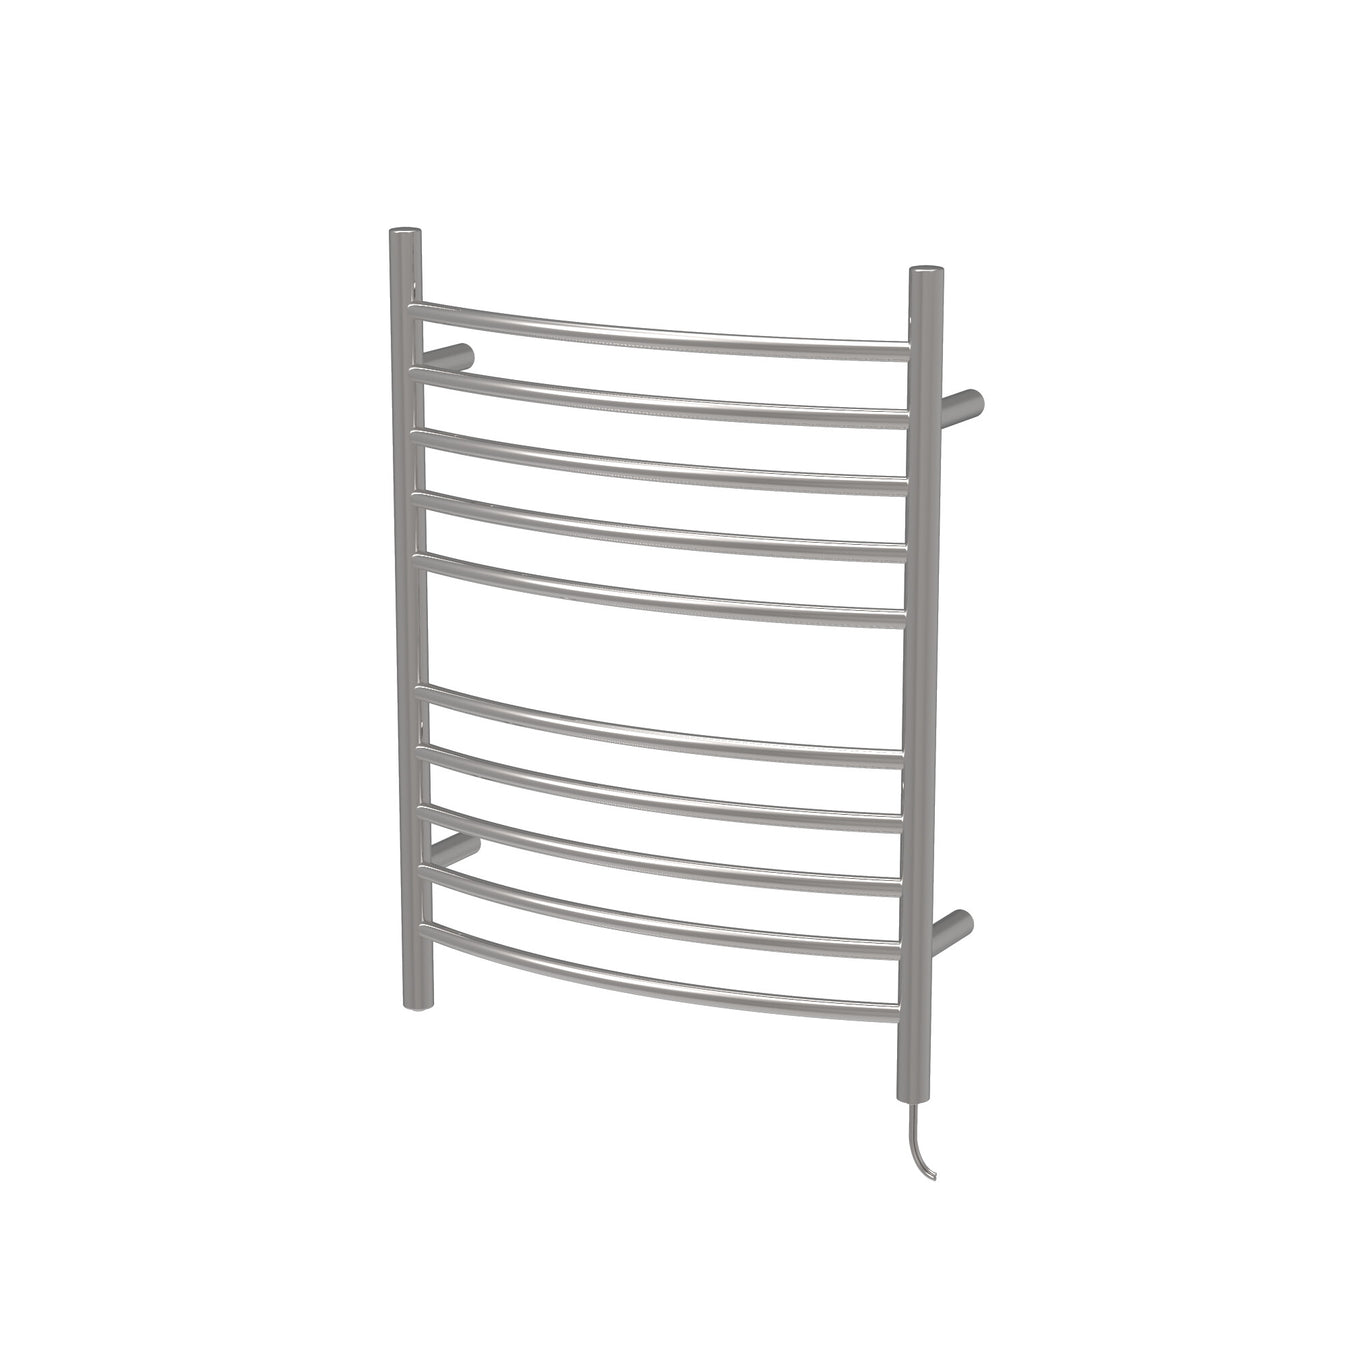 Amba Products Radiant Collection Plug-In Curved Towel Warmers